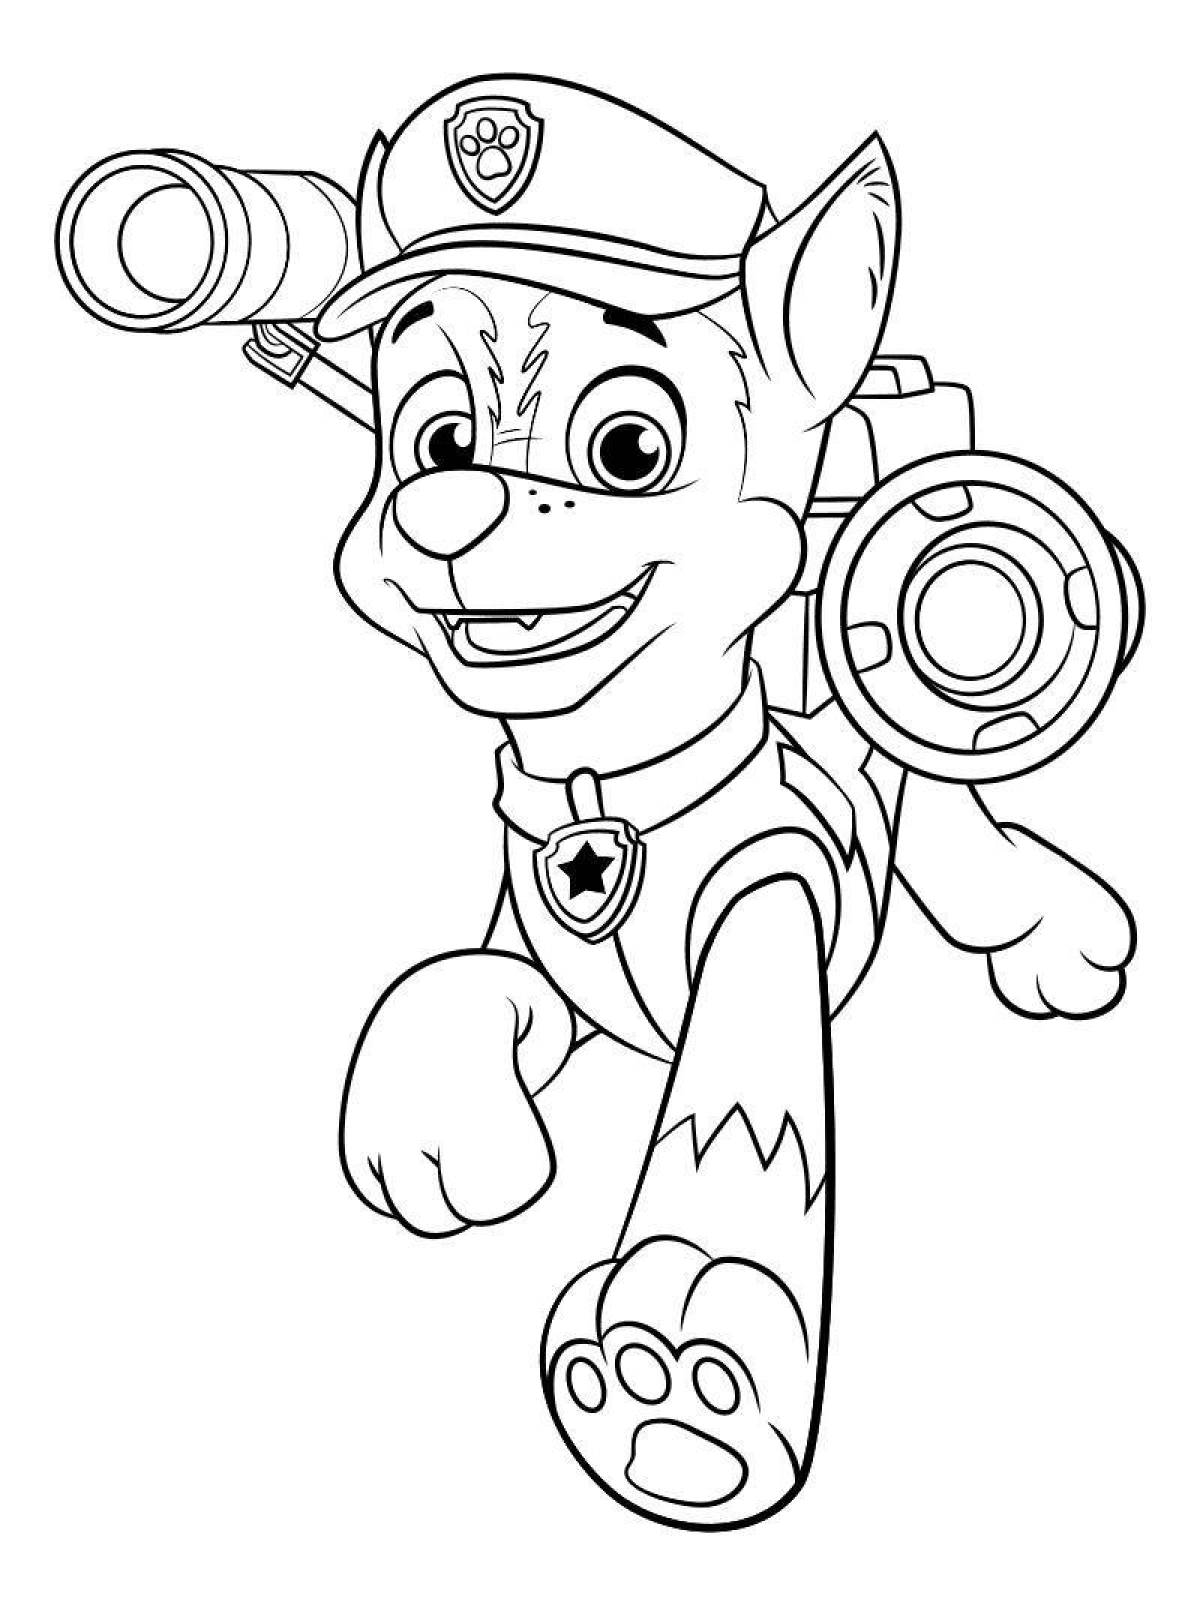 Coloring page hypnotic racer